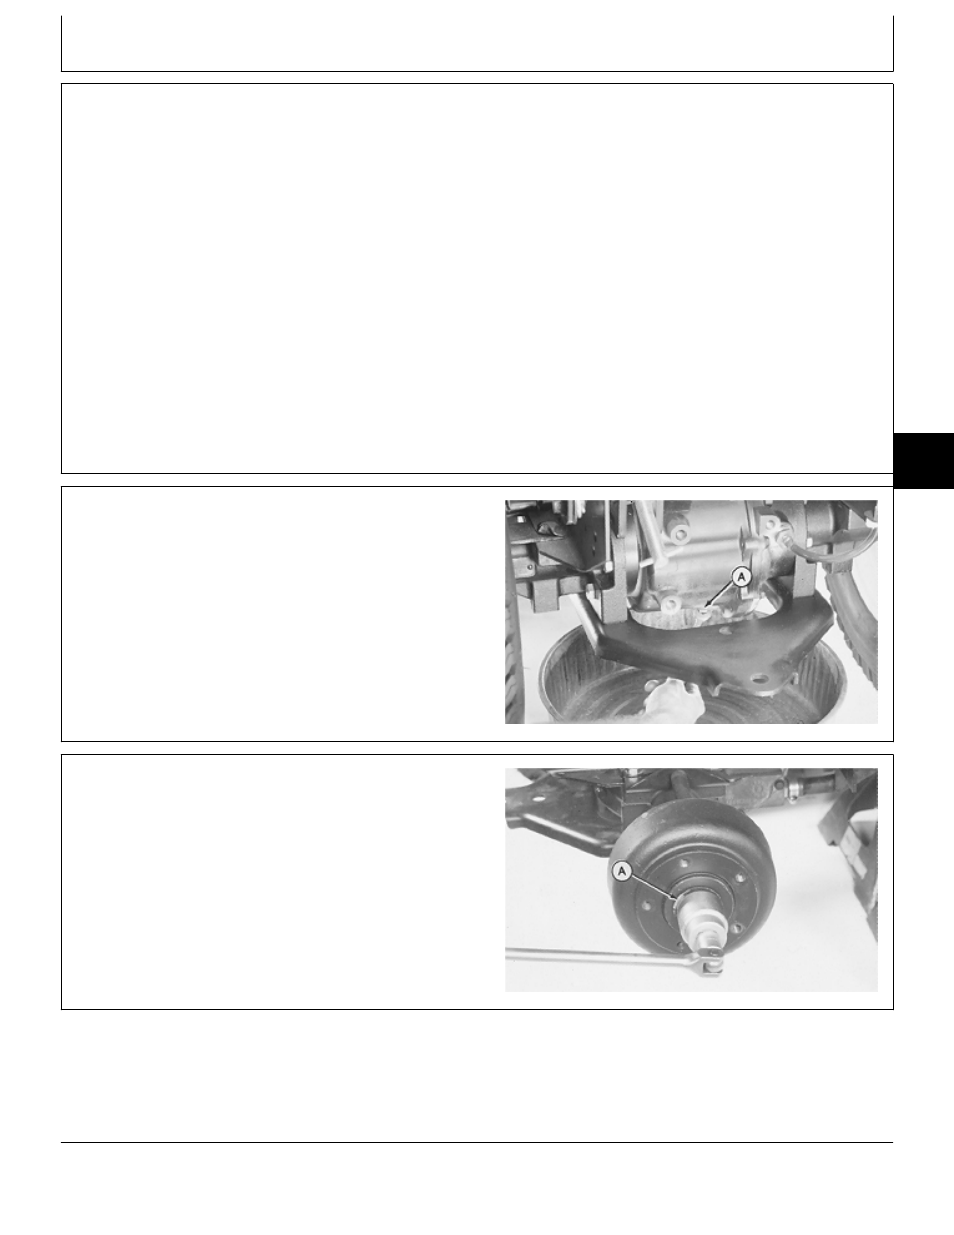 Rear axles, Remove axle, Group 20 | Other material | John Deere 318 User Manual | Page 117 / 440